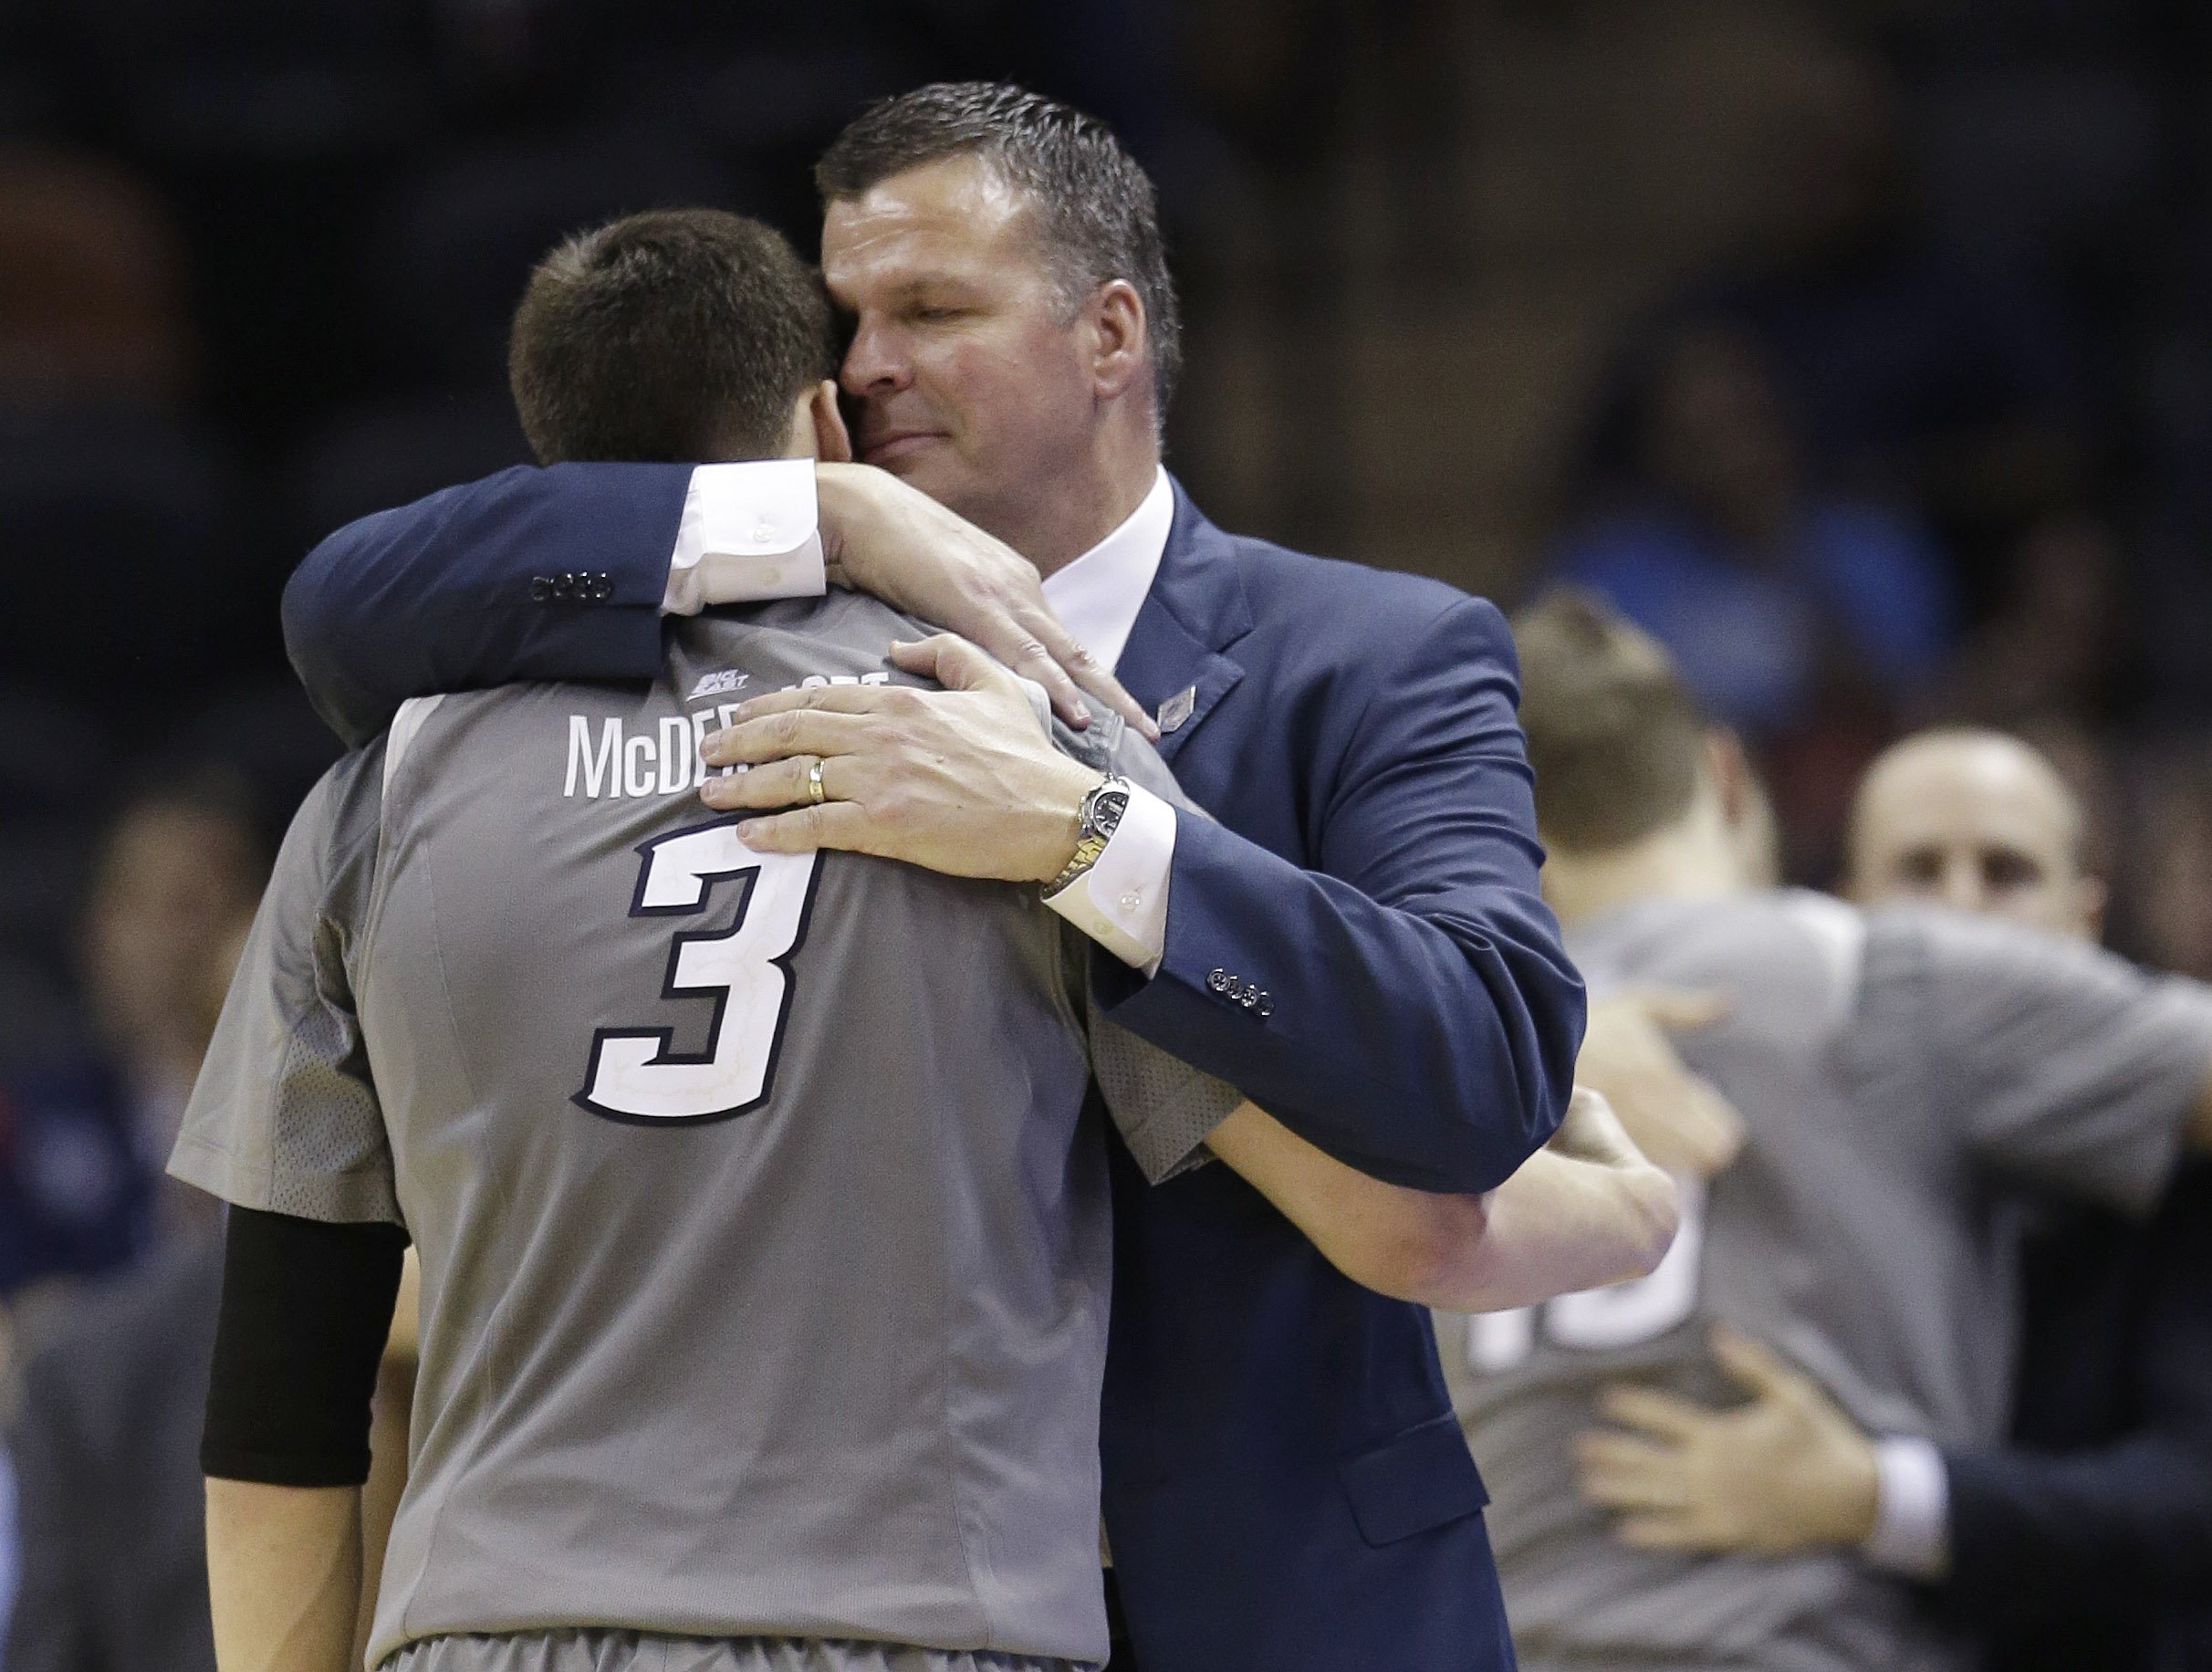 Creighton head coach Greg McDermott hugs his son Doug McDermott as he leaves the game during the final moments of their third-round loss to Baylor in the NCAA college basketball tournament Sunday, March 23, 2014, in San Antonio. Baylor won 85-55.